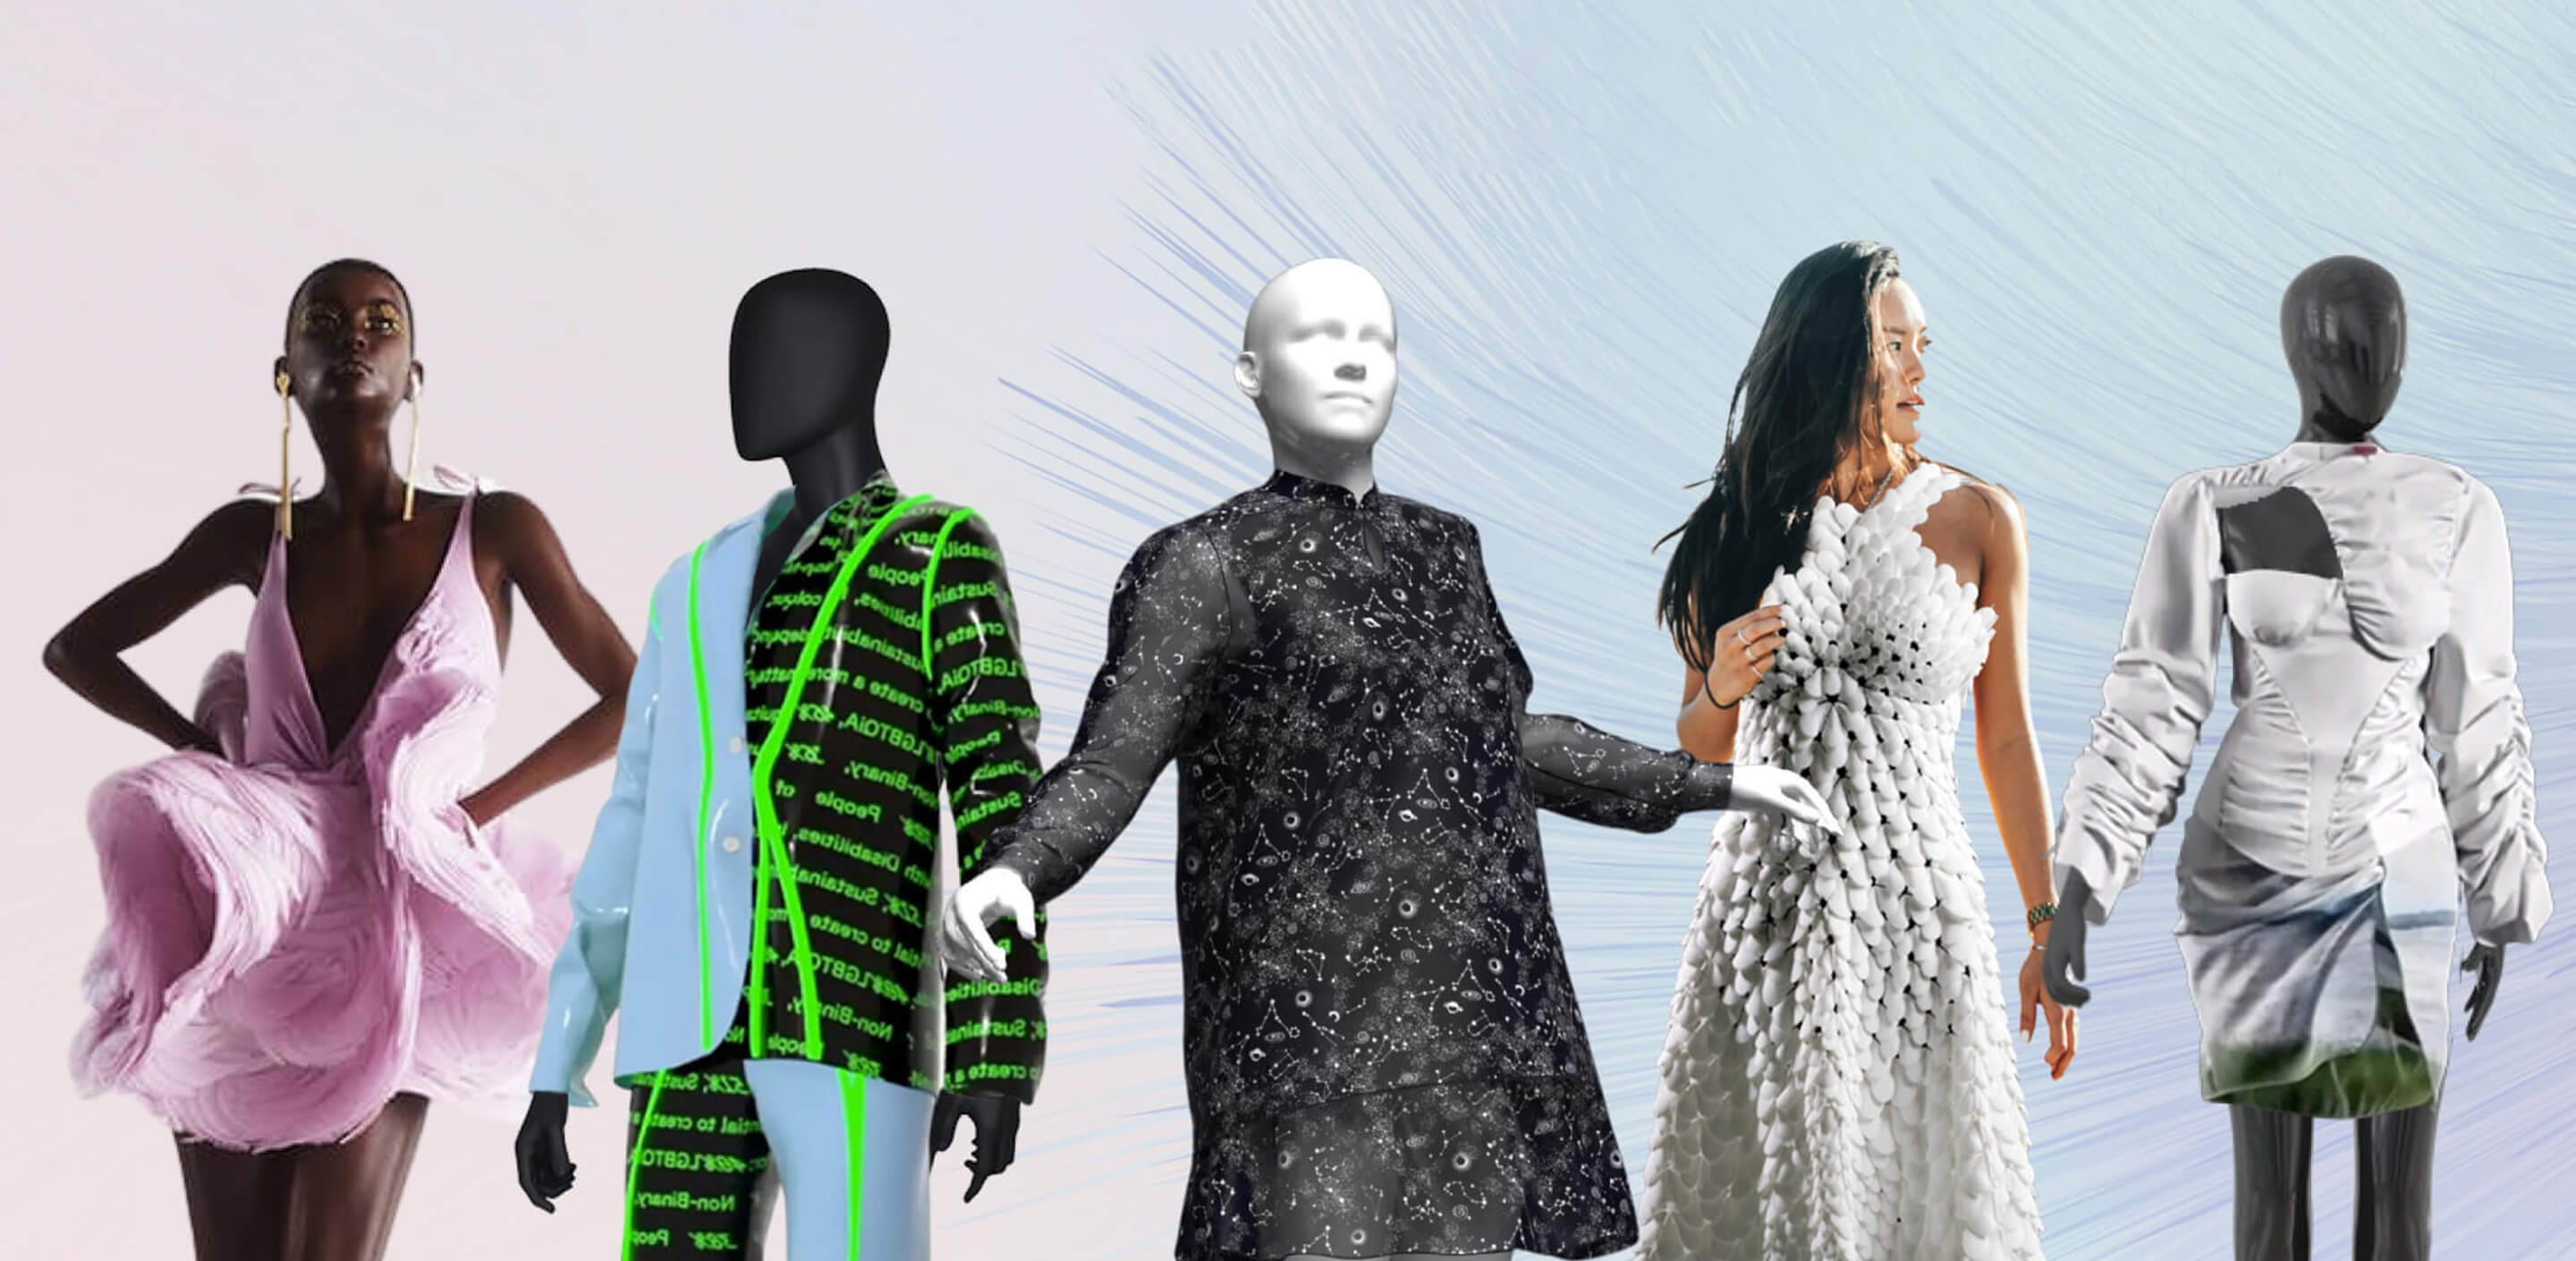 FASHION STARTUPS: THE INDUSTRY'S FUTURE